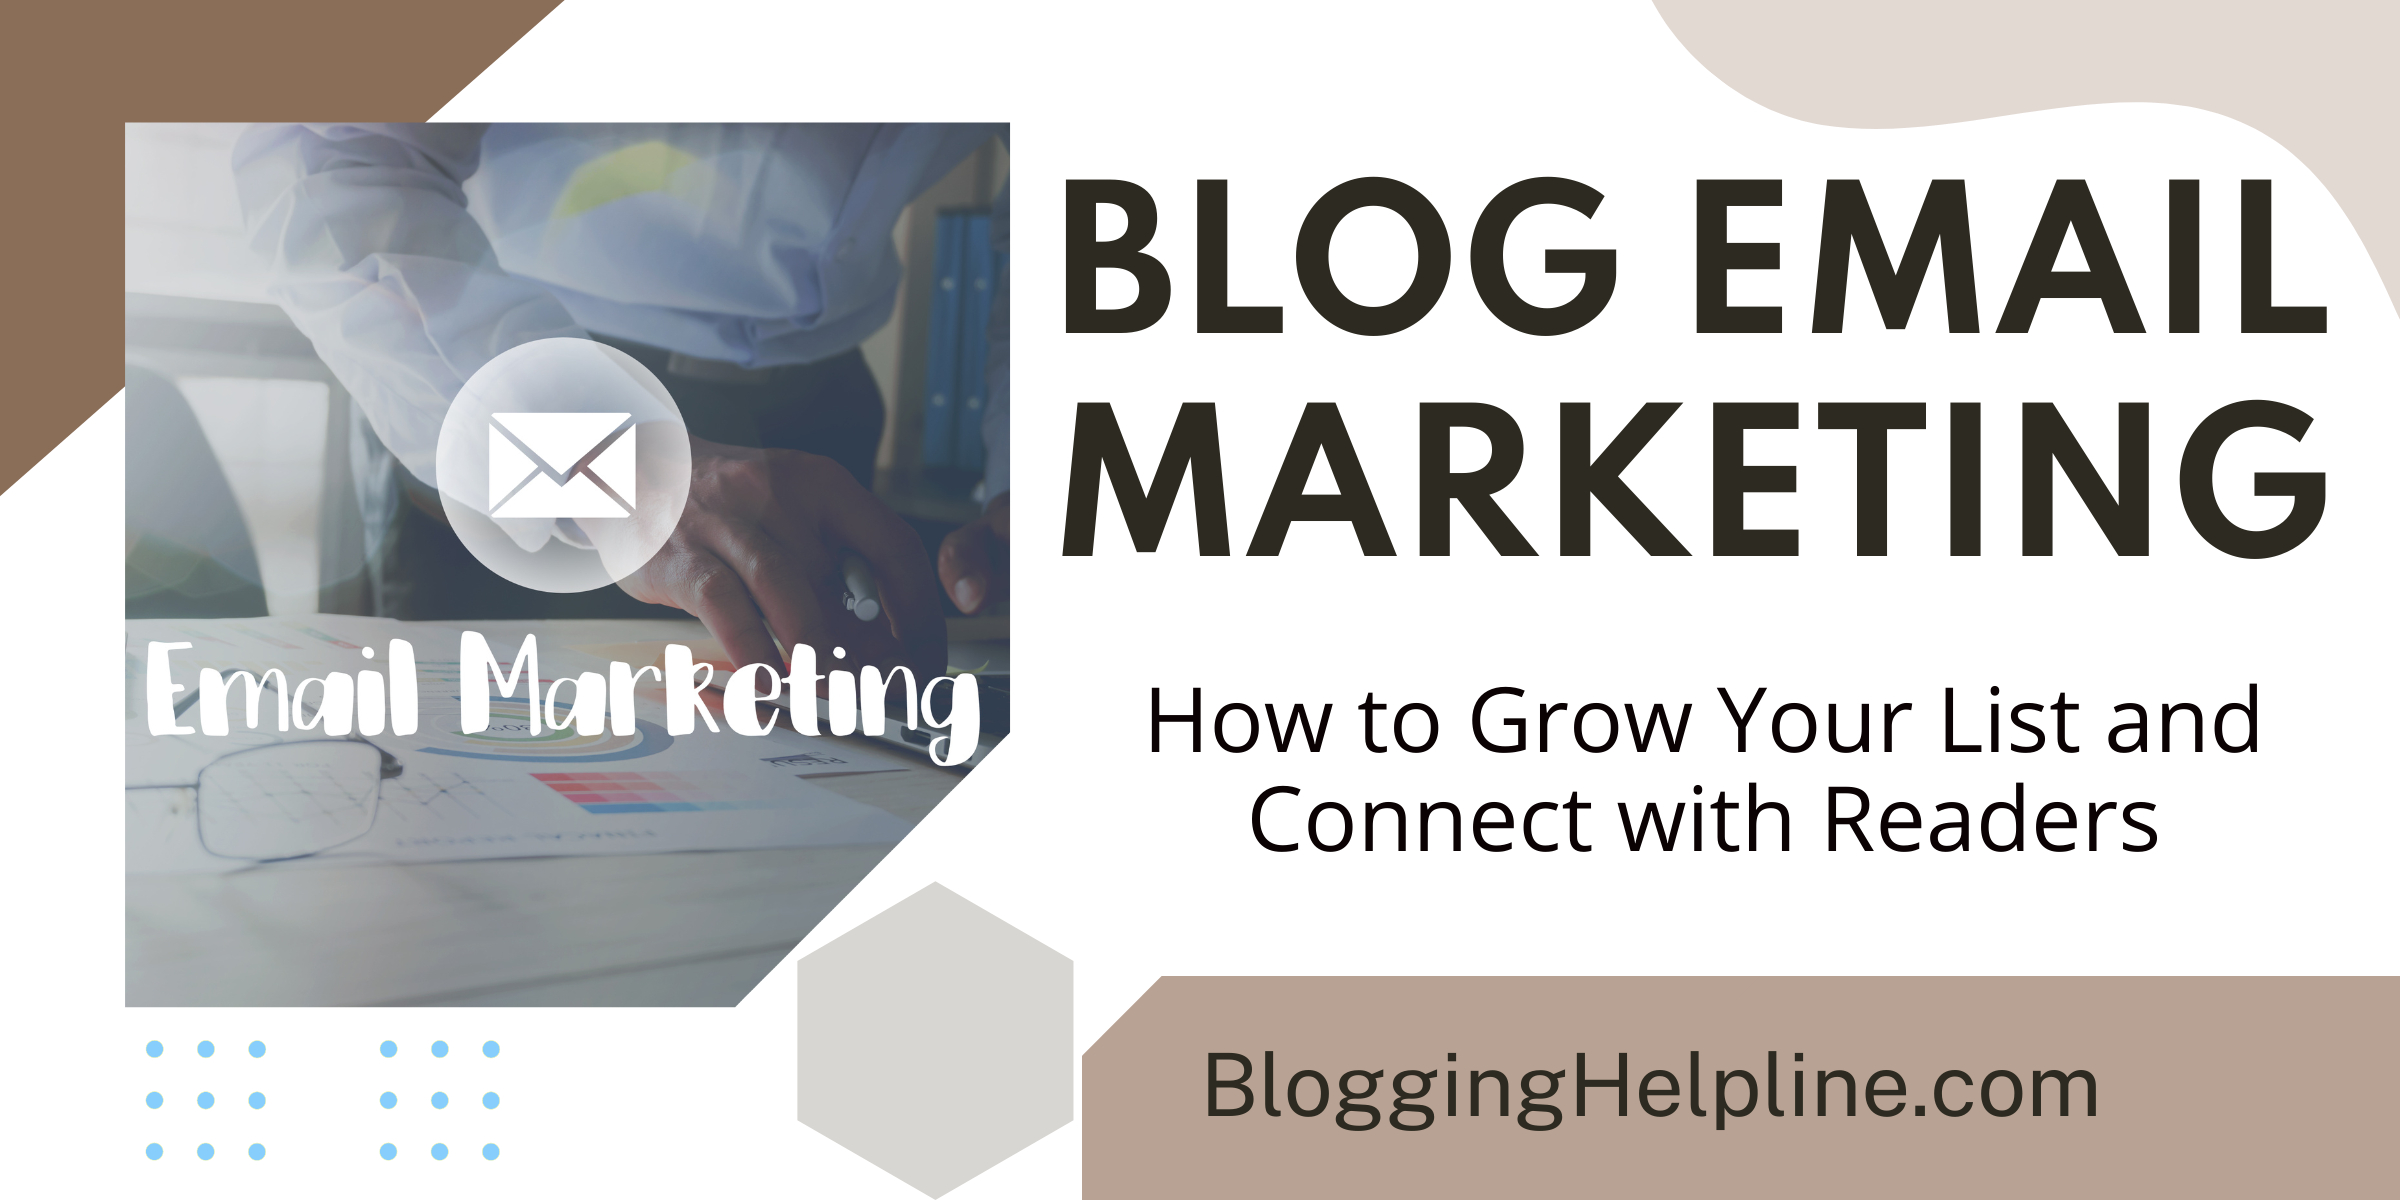 Blog Email Marketing How to Grow Your List and Connect with Readers